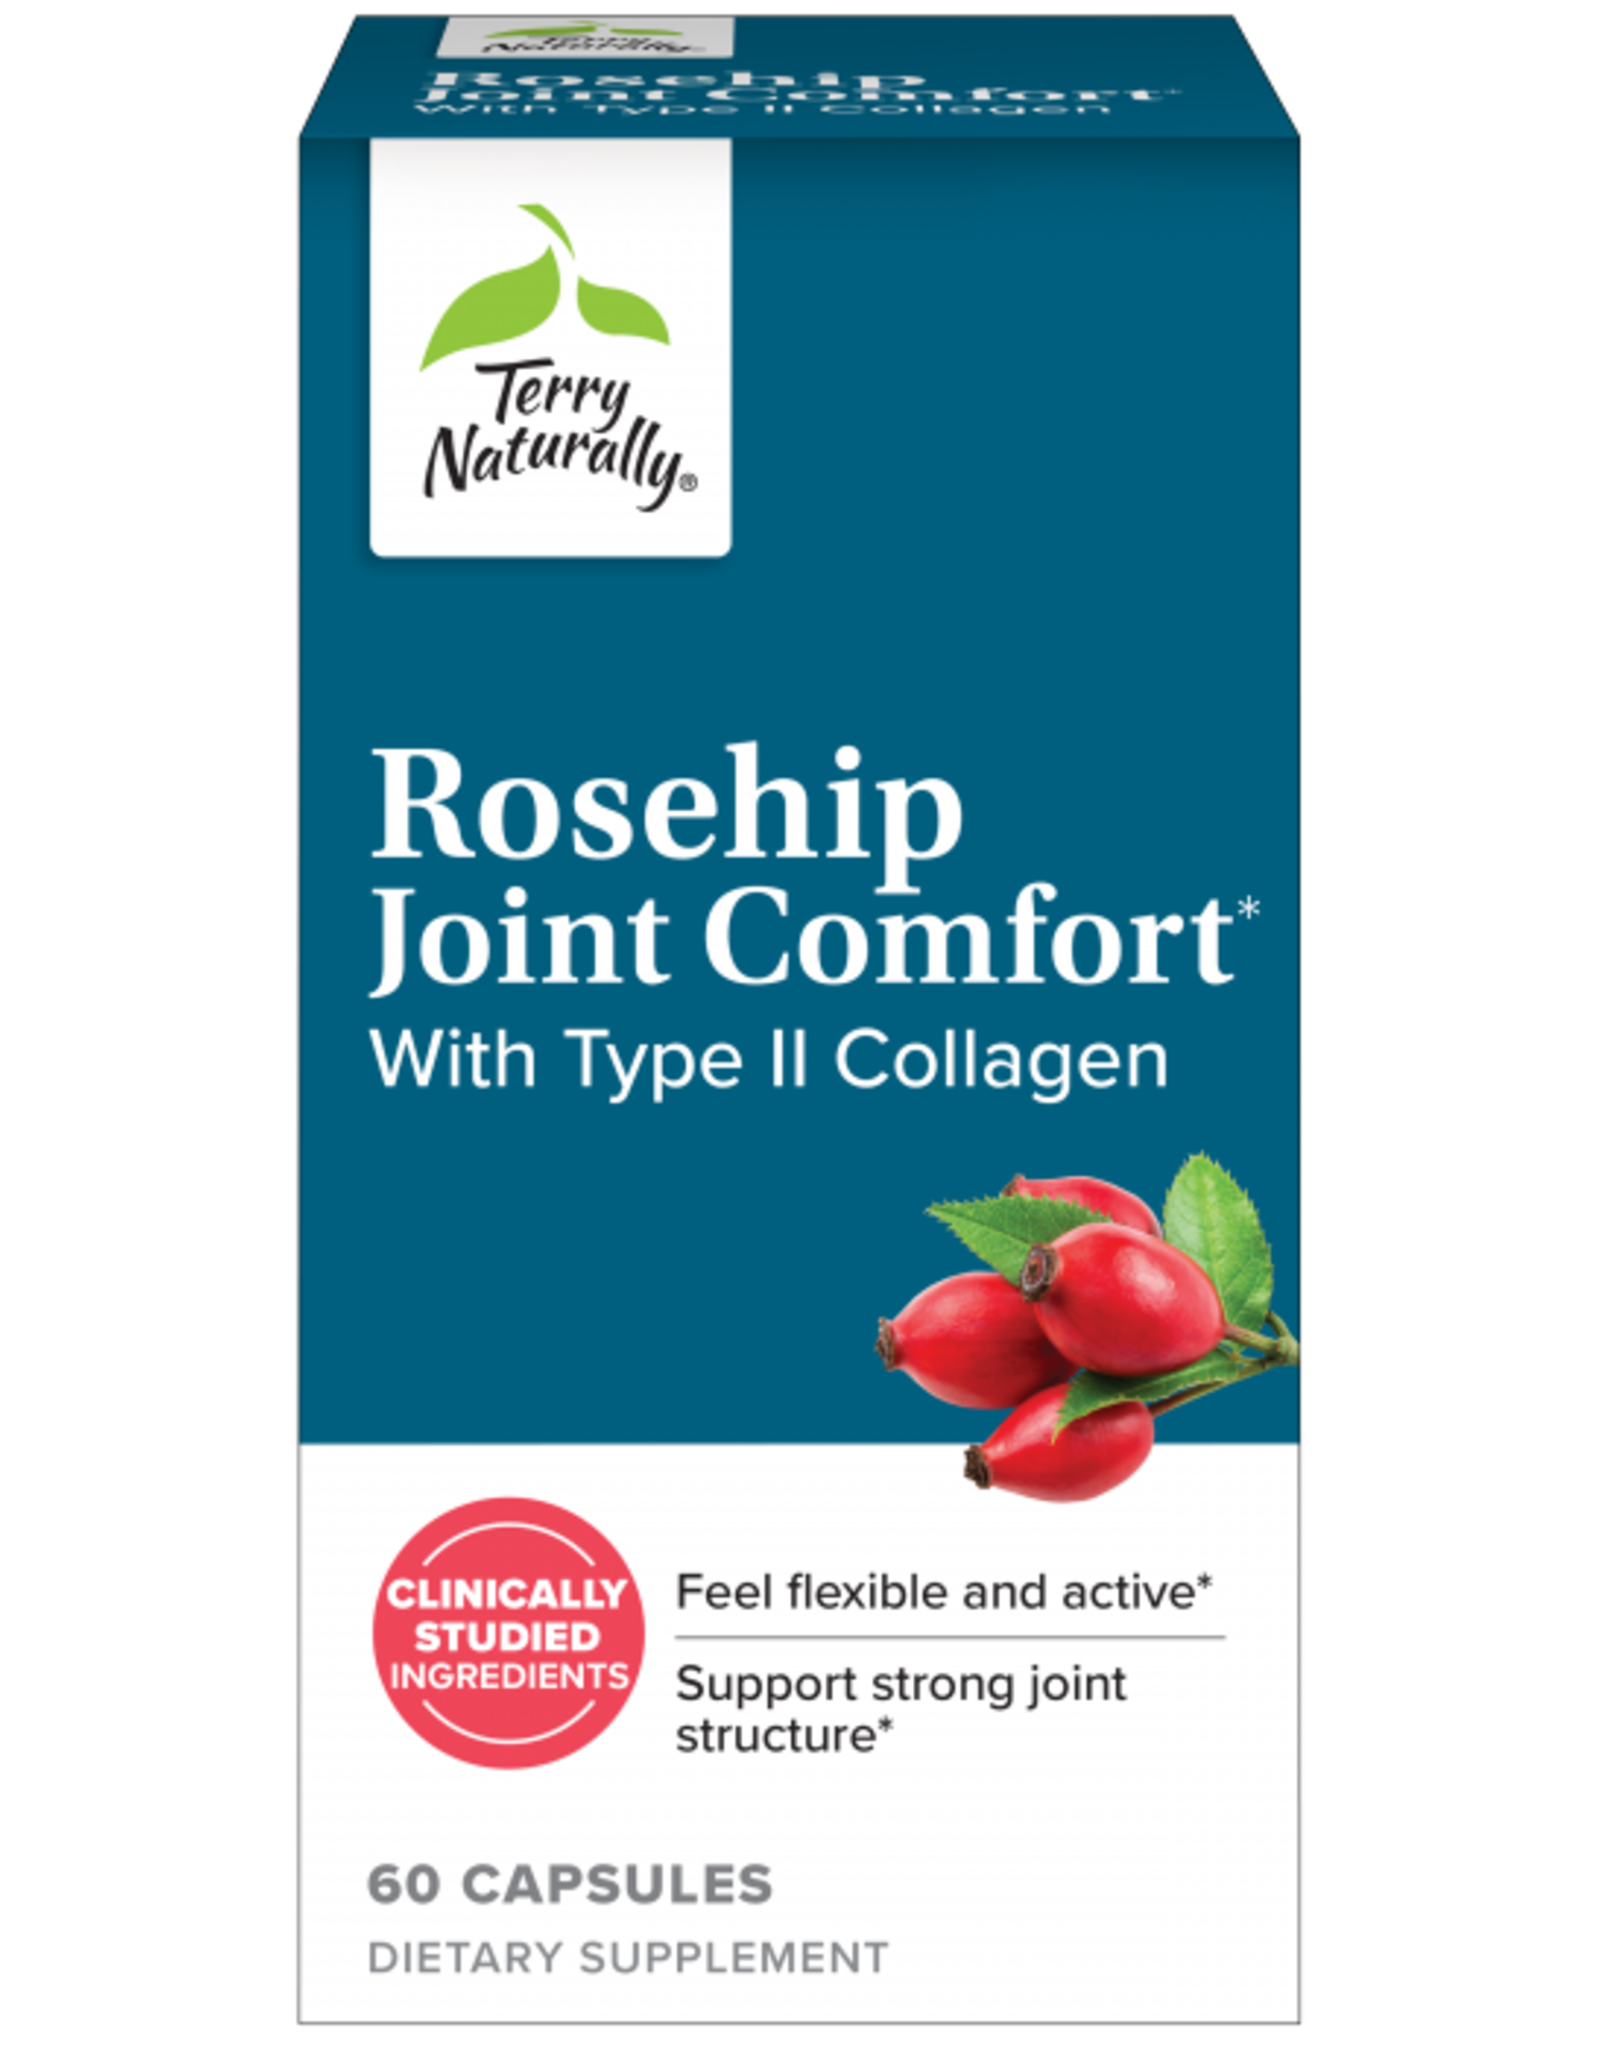 Terry Naturally Rosehip Joint Support